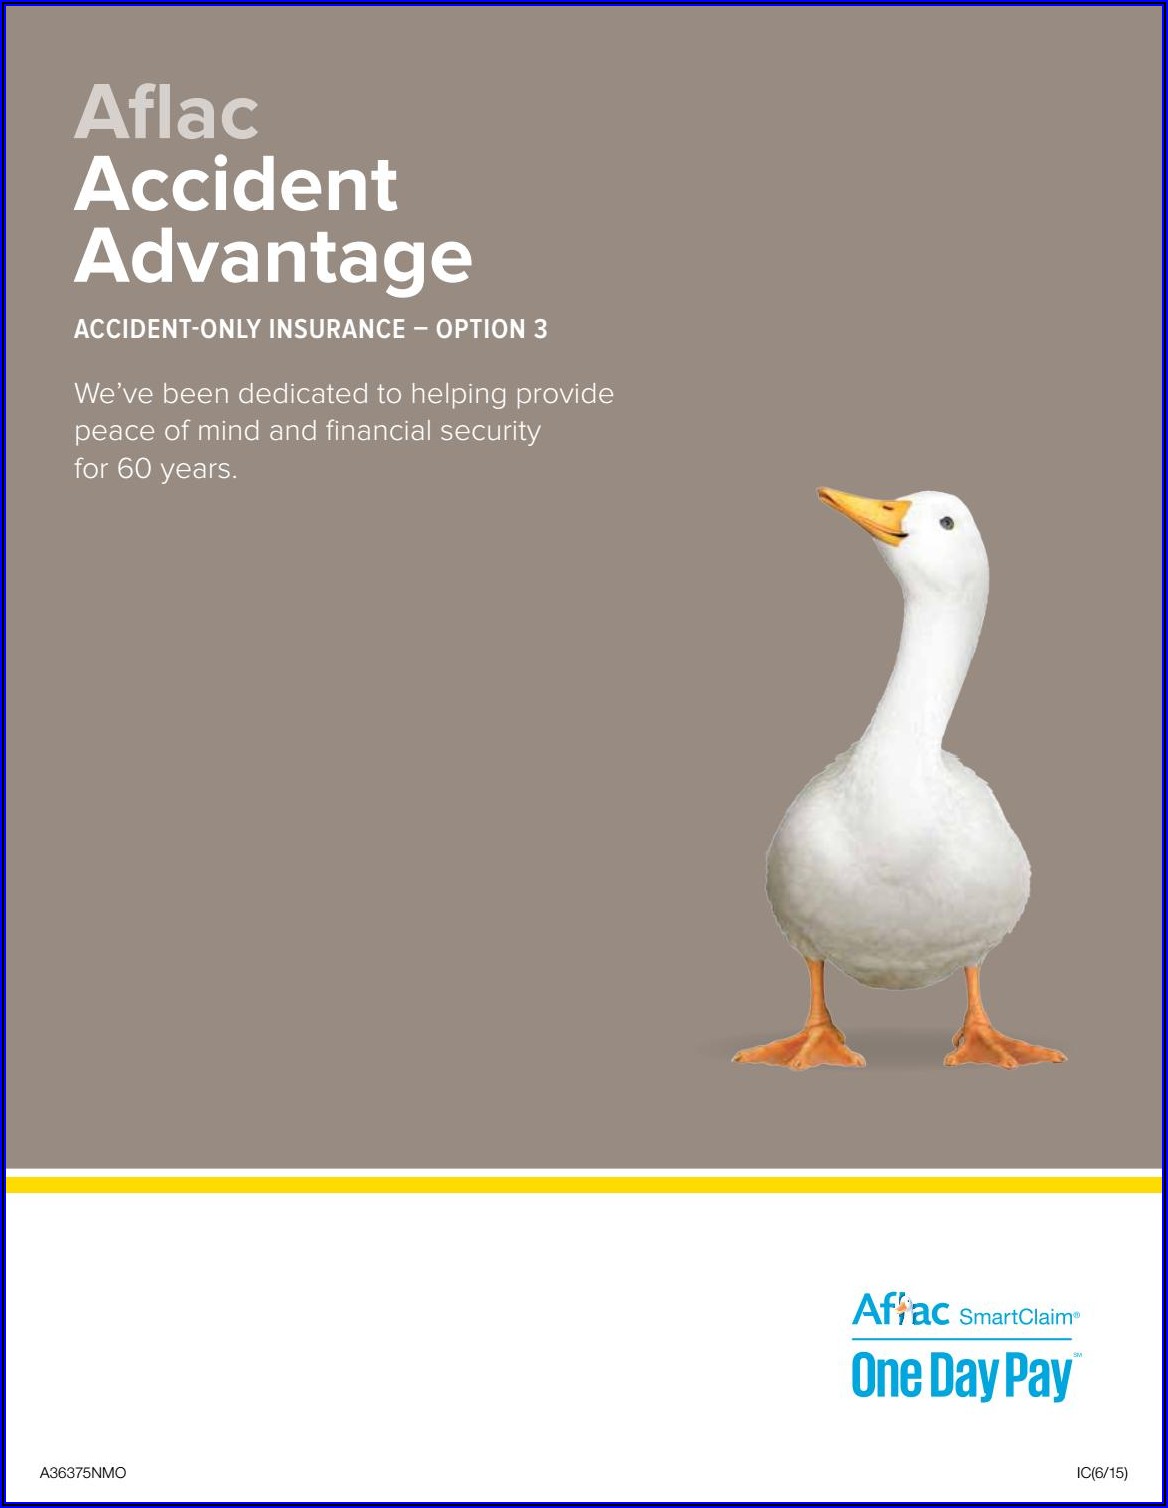 Aflac Accident Policy Brochure